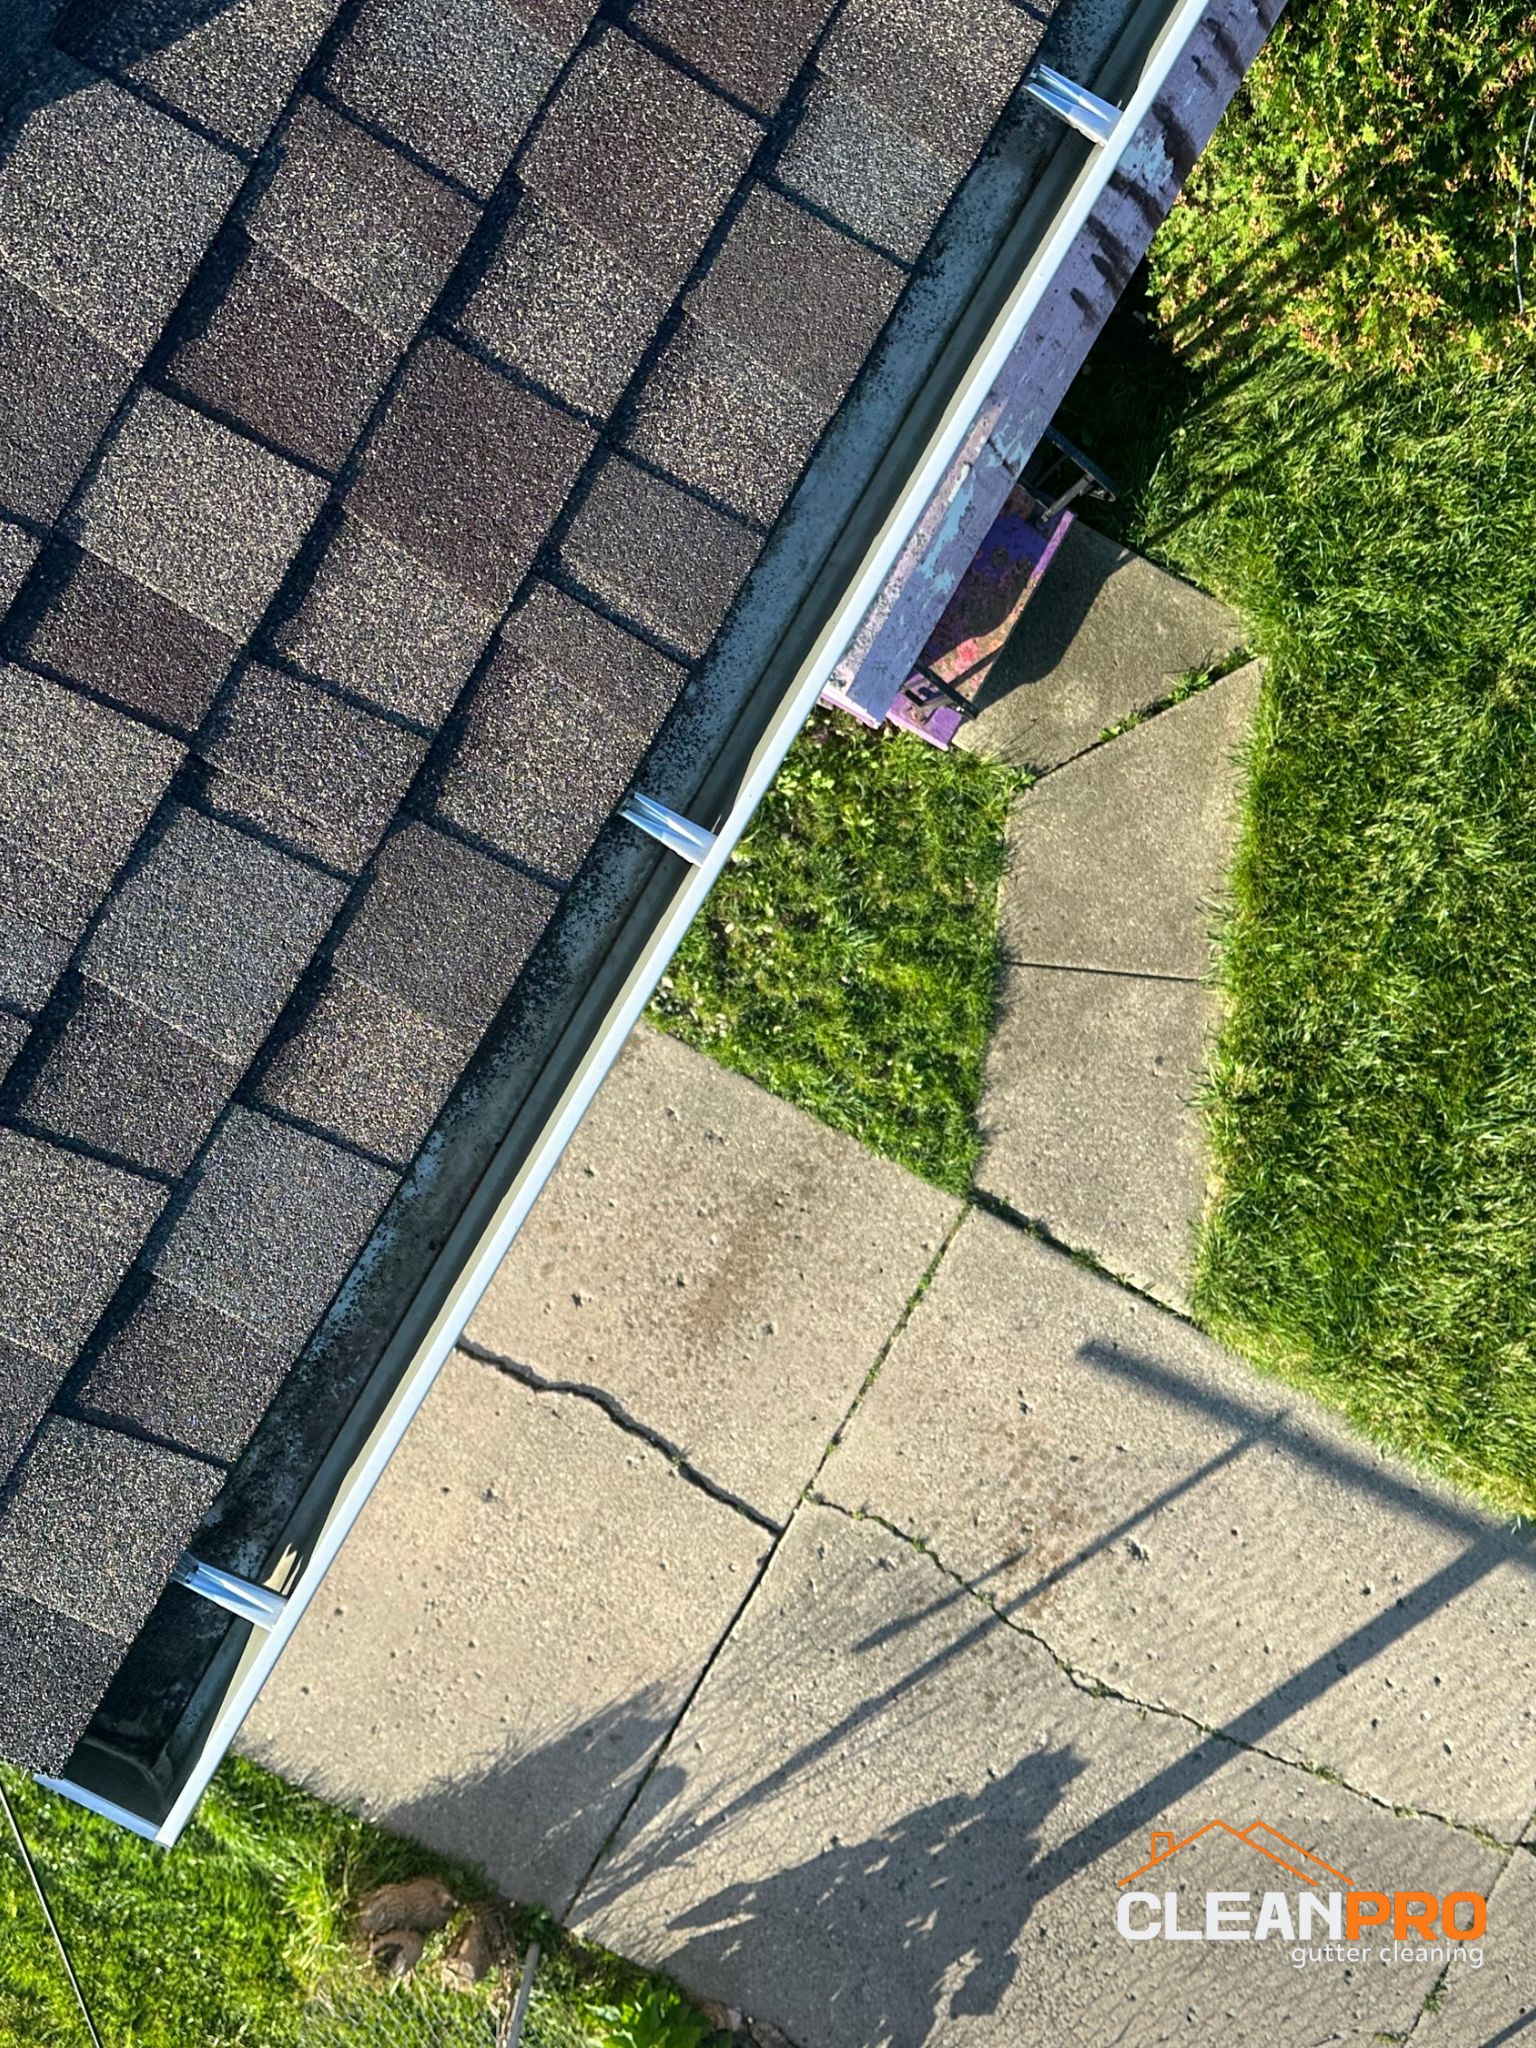 Quality Gutter Cleaning in Charlotte NC